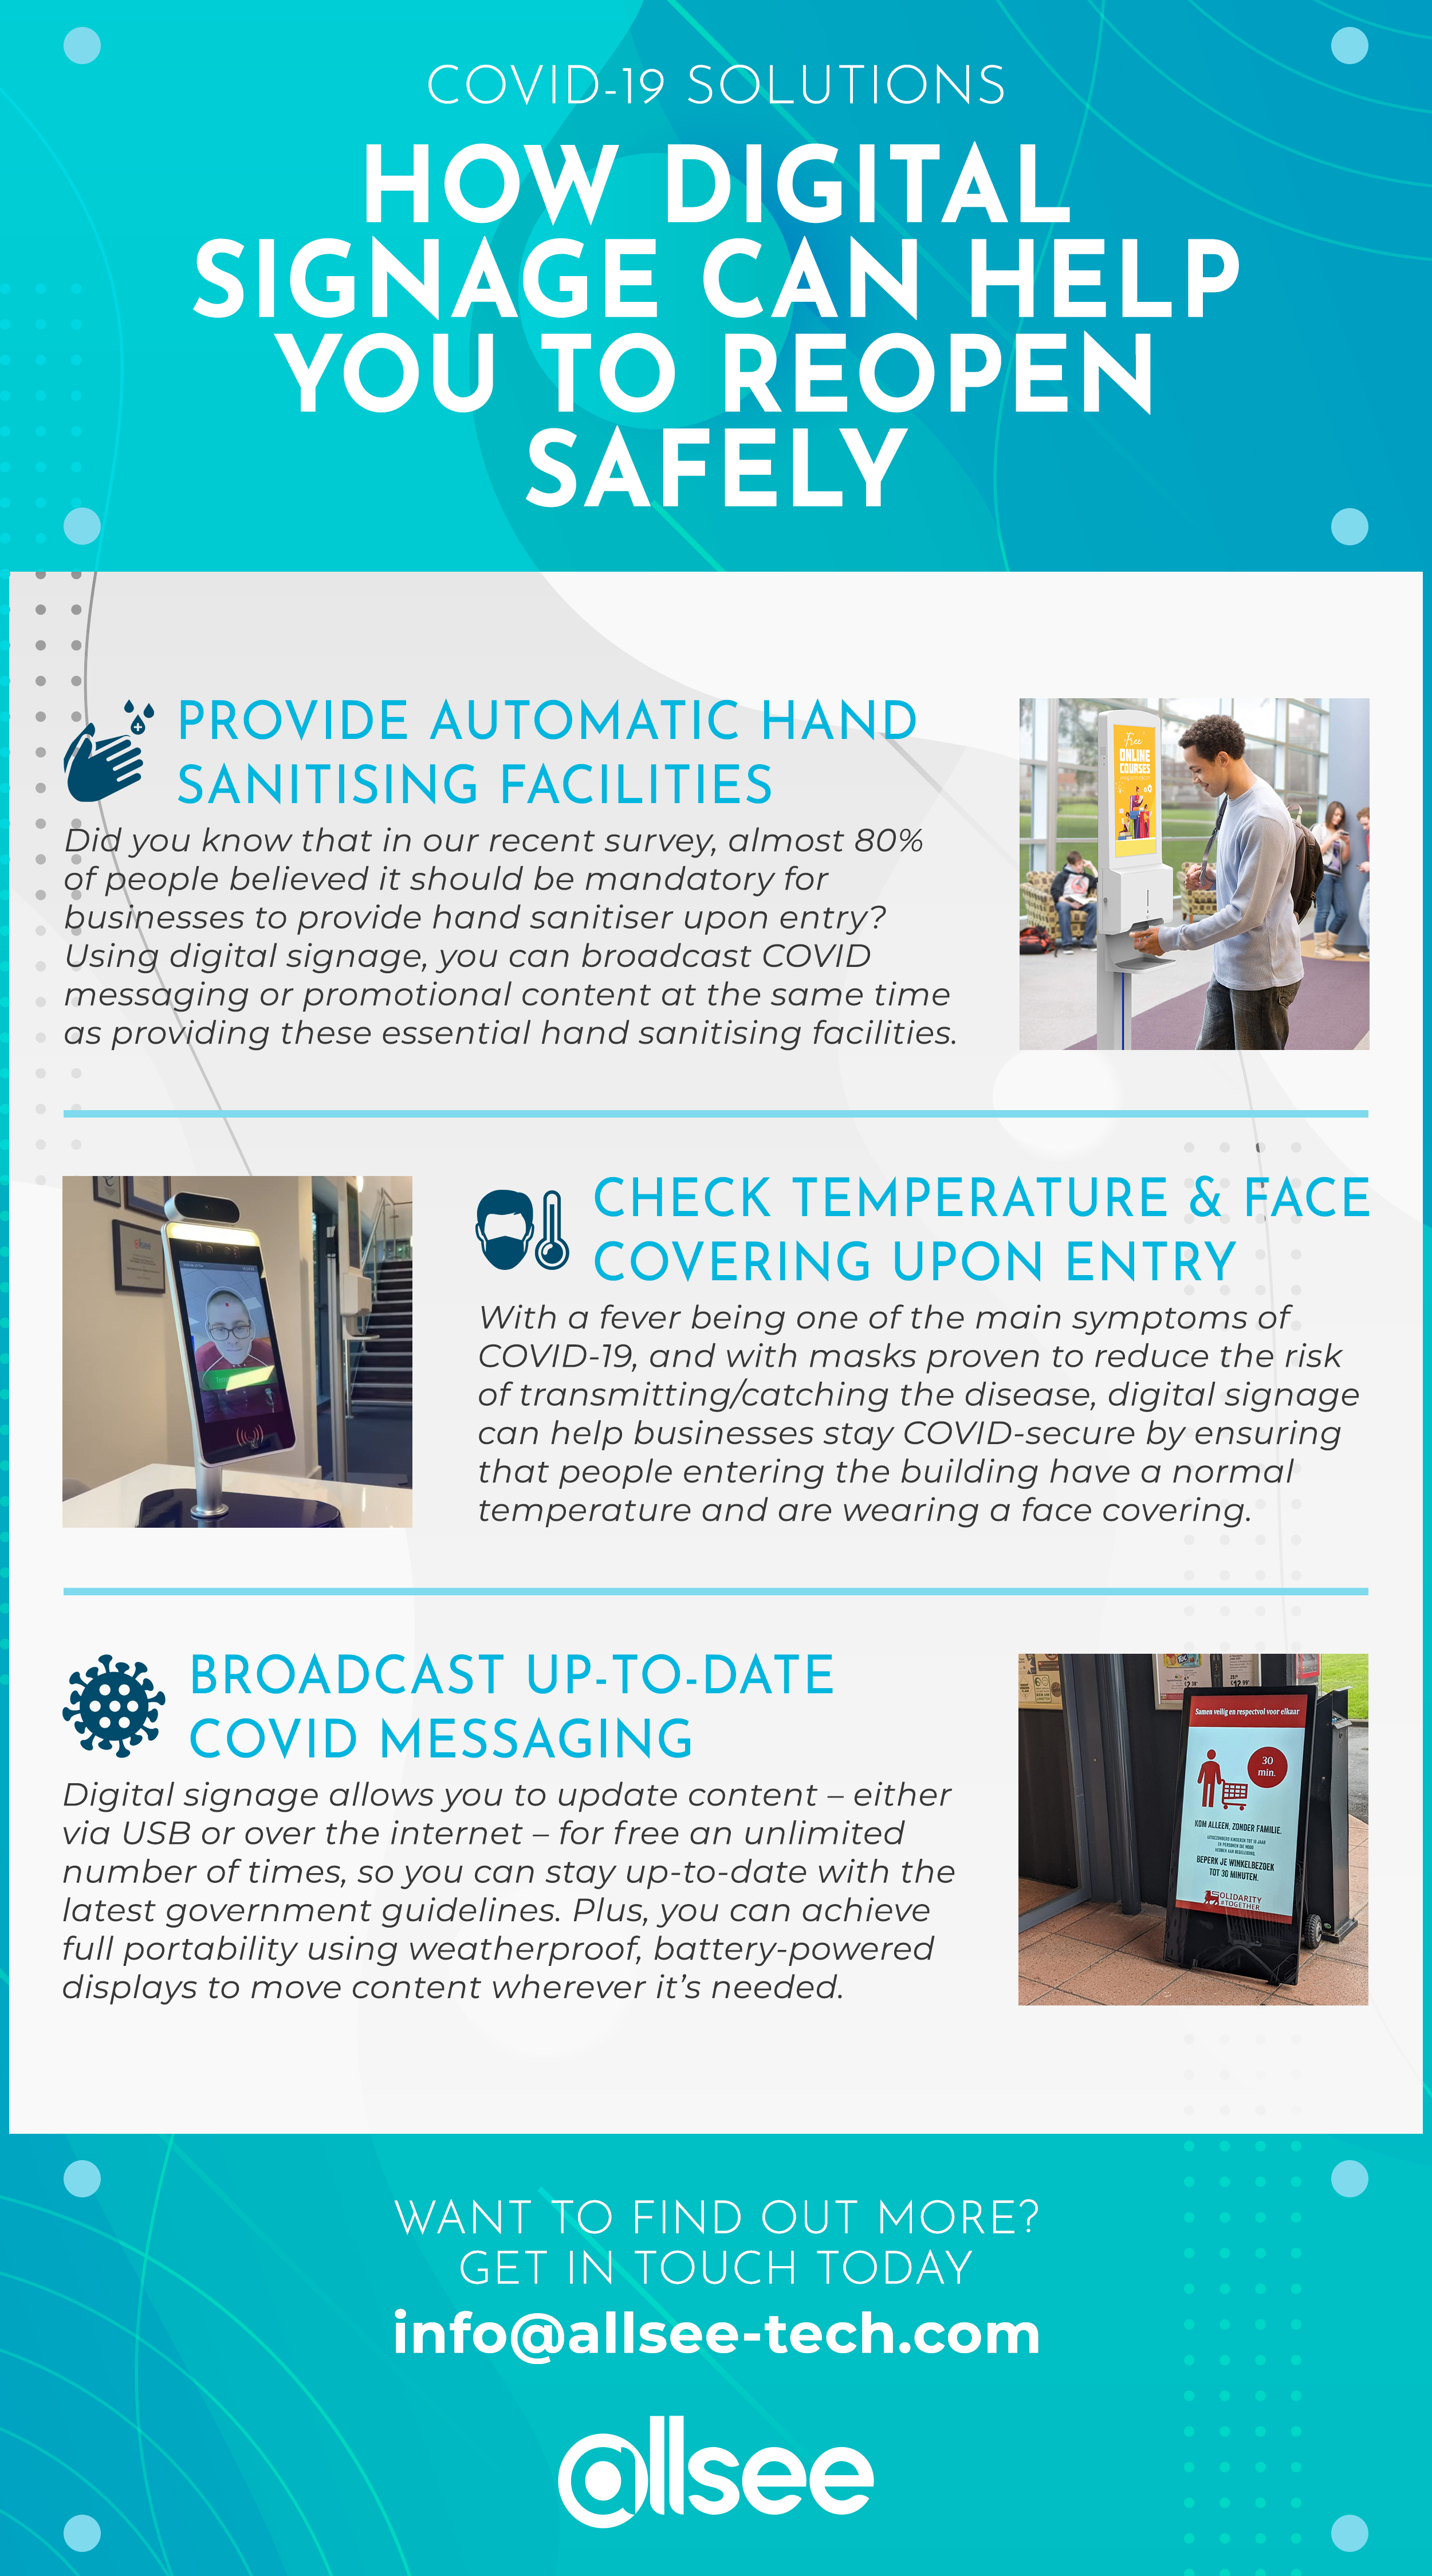 'How Digital Signage Can Help You to Reopen Safely' infographic